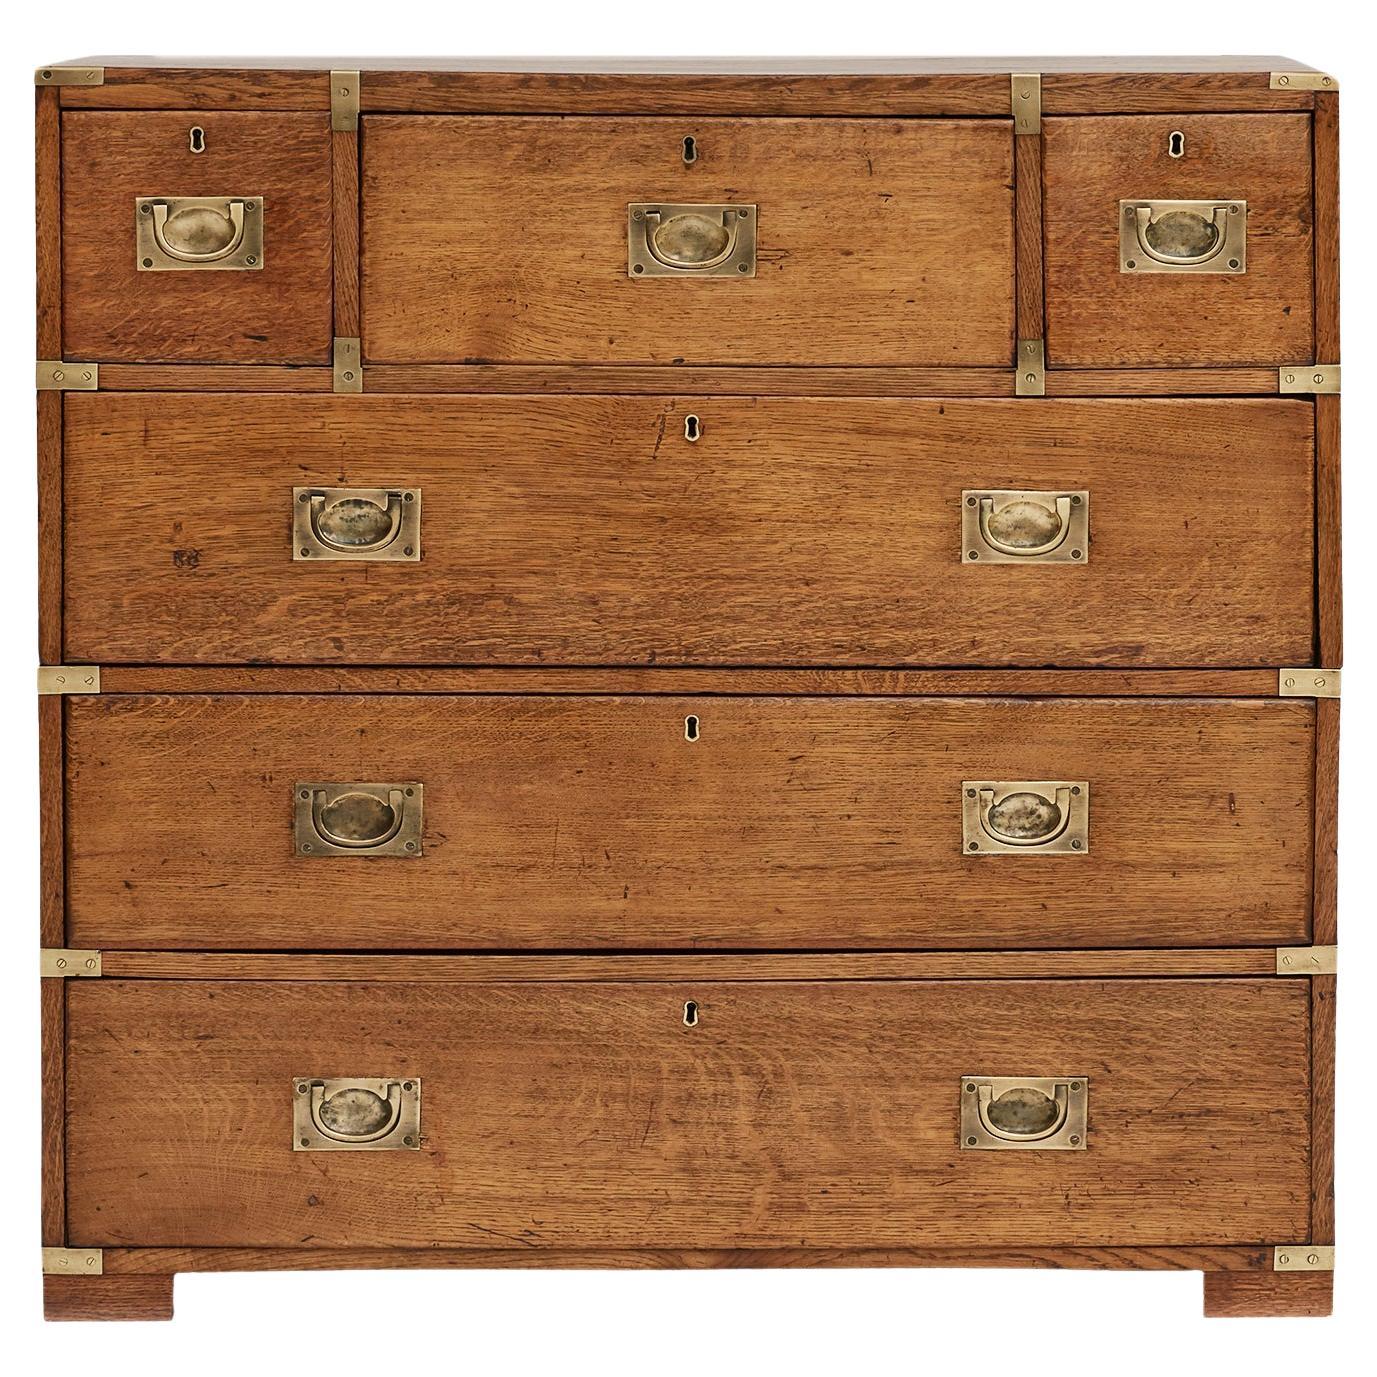 English 19th Century Military Campaign Chest